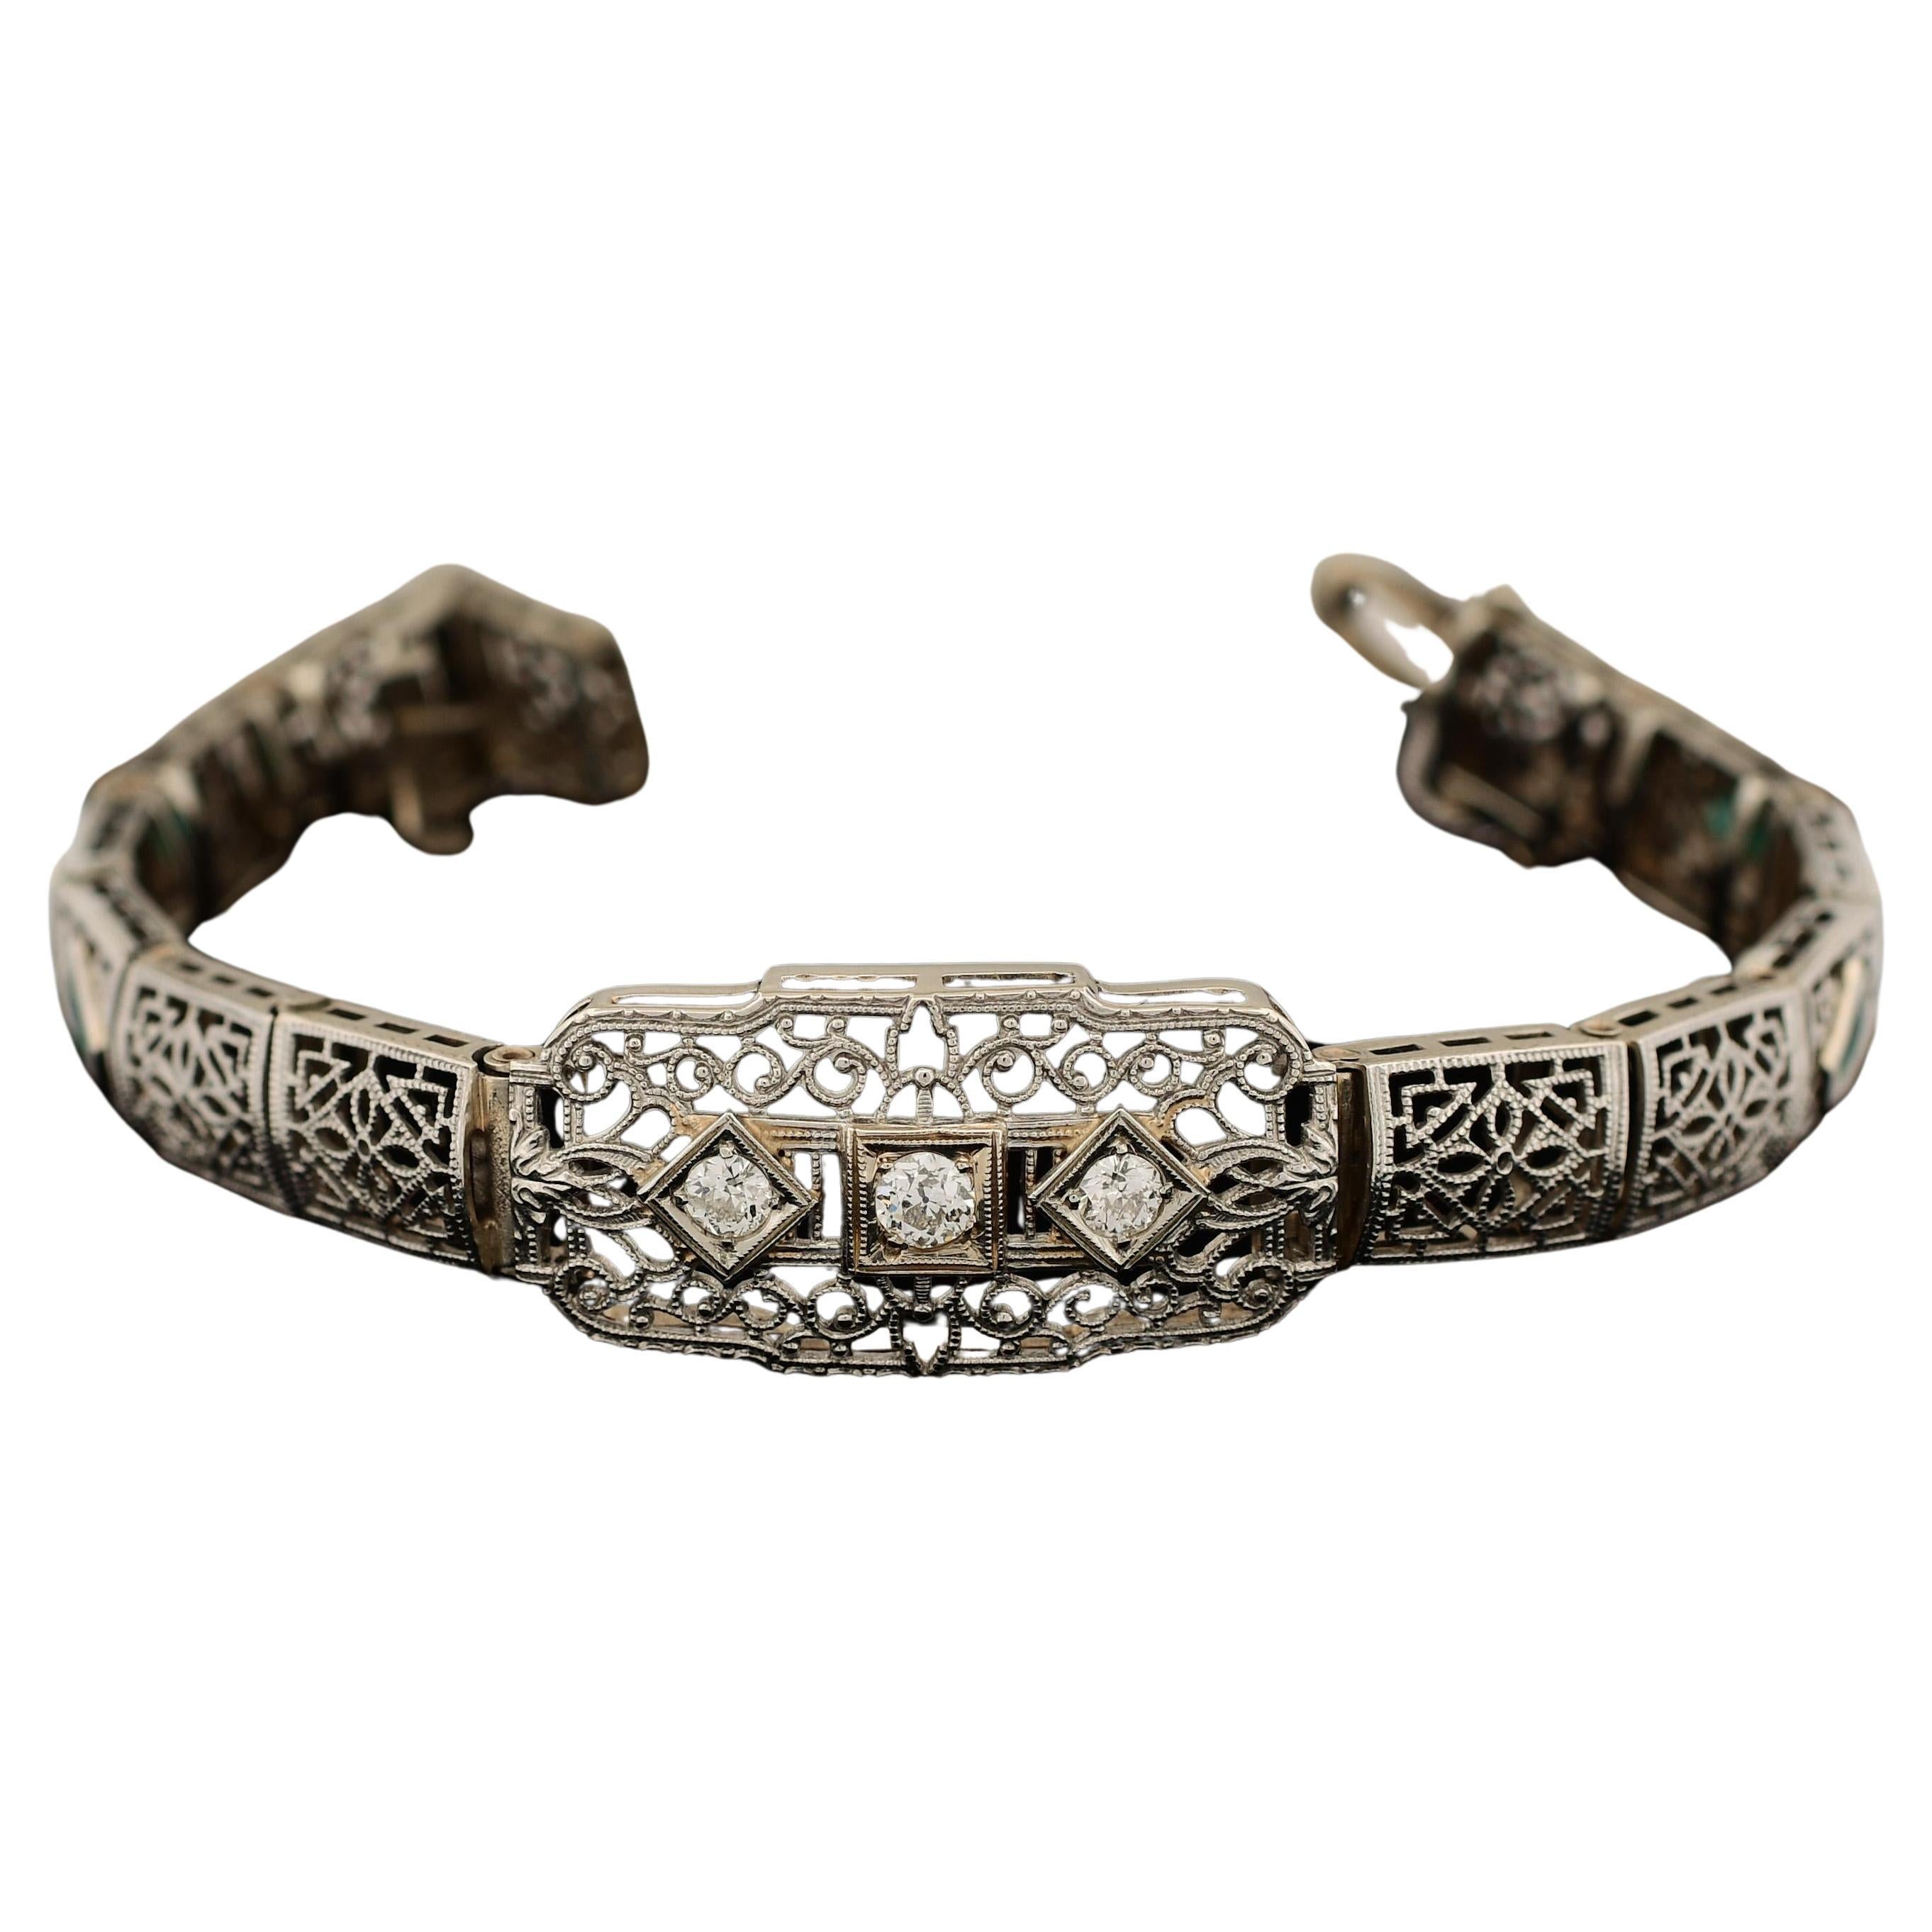 The 14K White Gold Art Deco Filigree Diamond Bracelet, adorned with synthetic French cut emeralds, is a remarkable piece of jewelry that pays homage to the iconic Art Deco era. Its exquisite filigree design in white gold showcases the era's